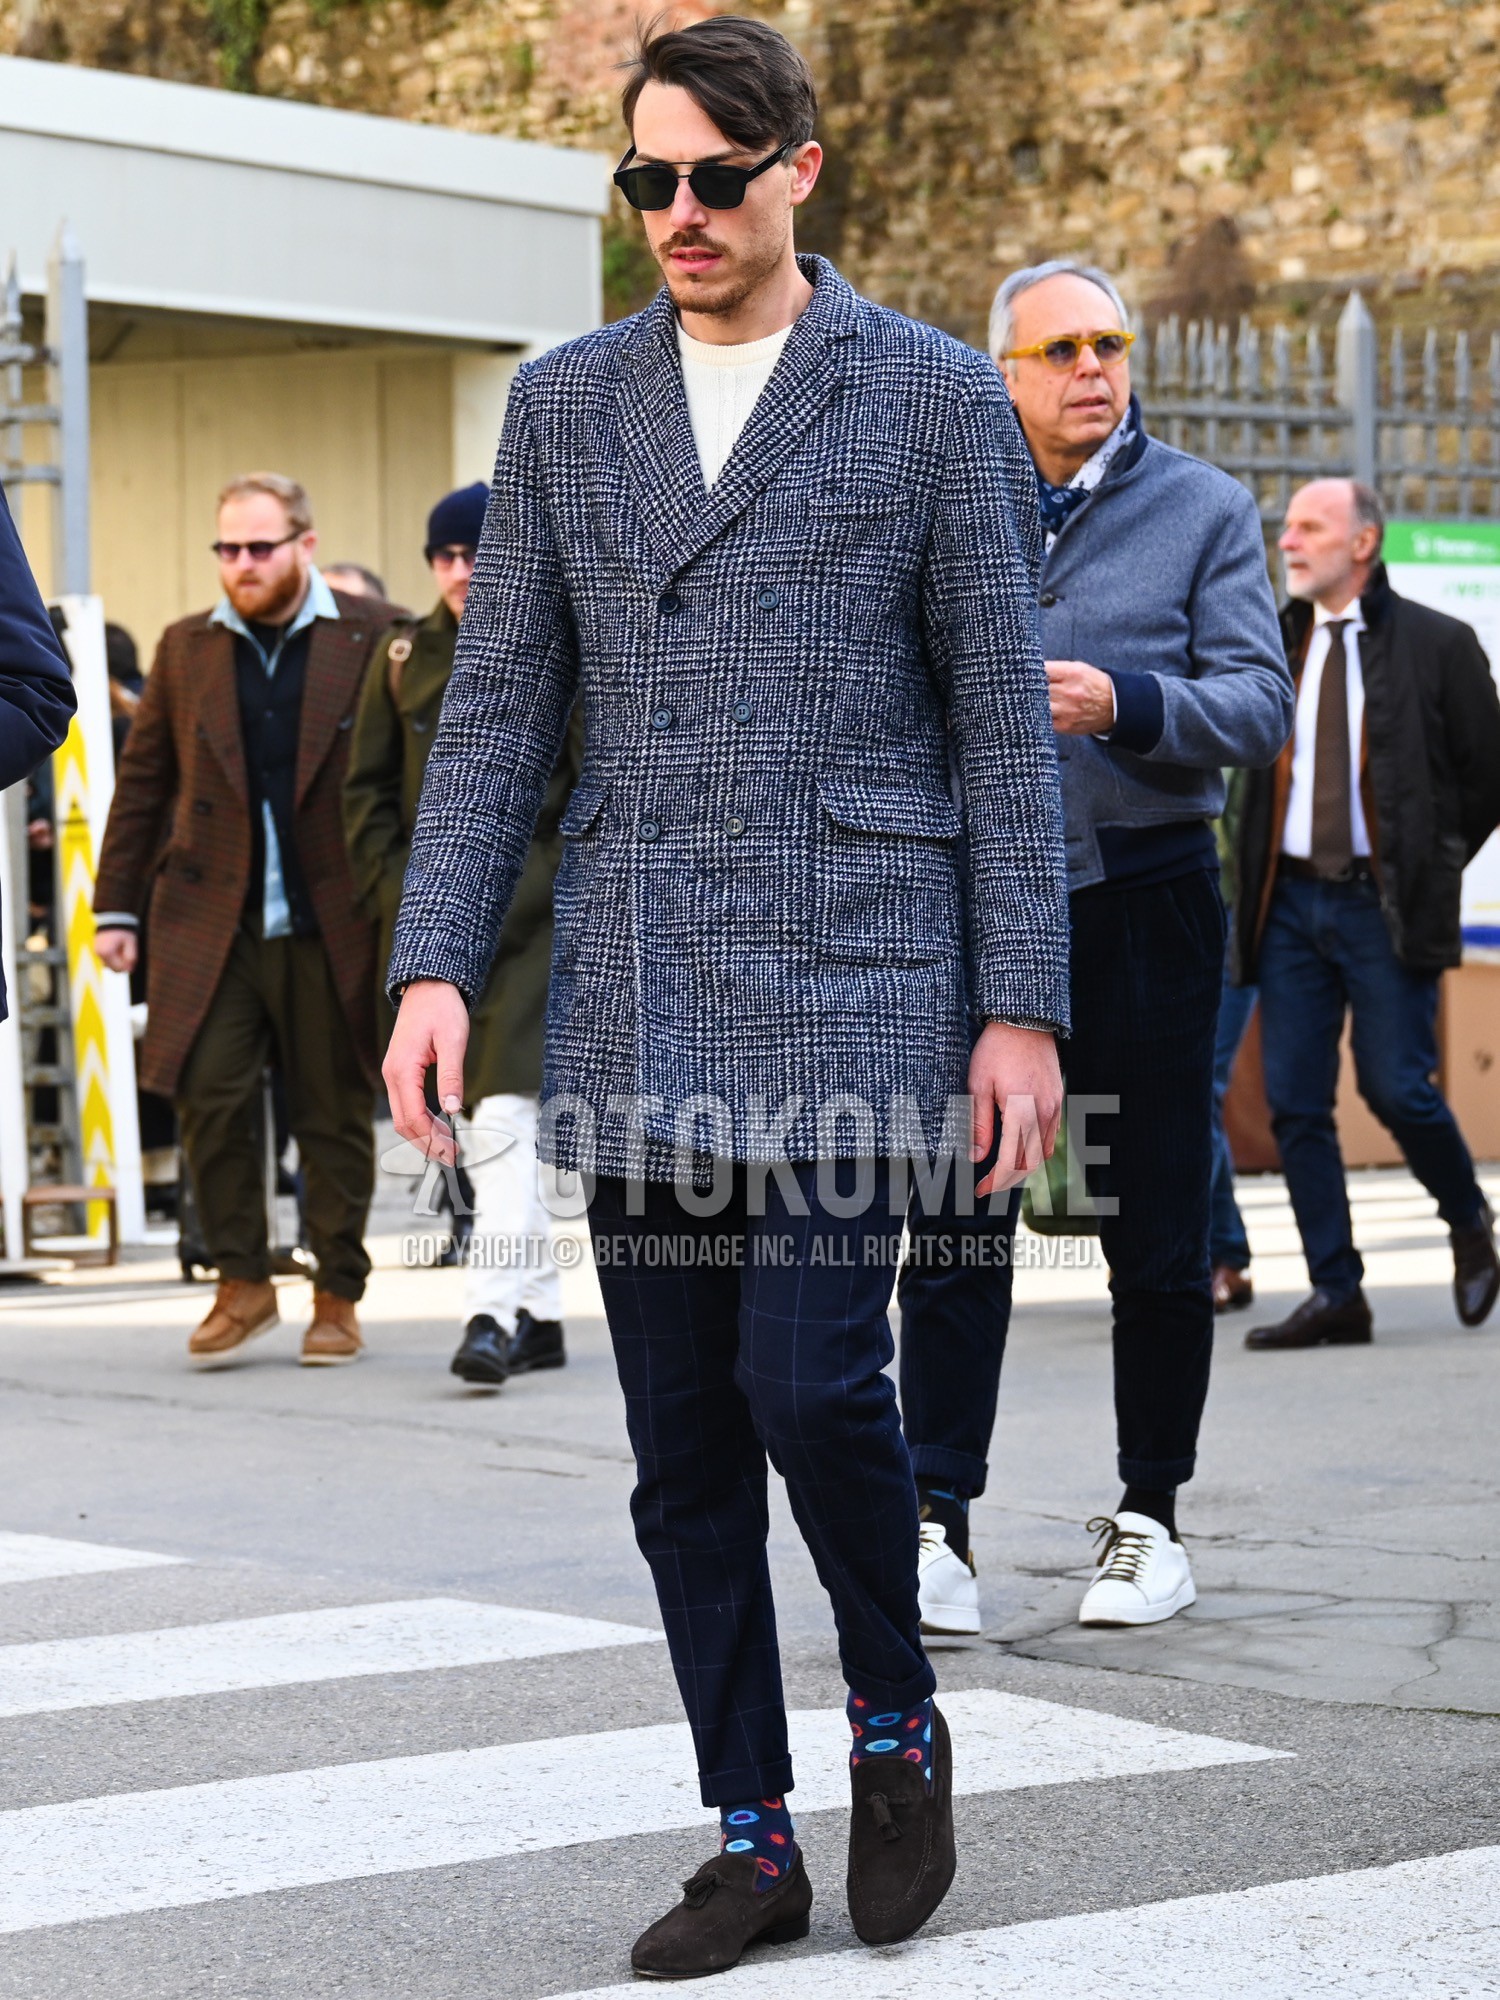 Men's autumn winter outfit with black plain sunglasses, navy check chester coat, white plain sweater, navy check slacks, navy graphic socks, brown tassel loafers leather shoes.